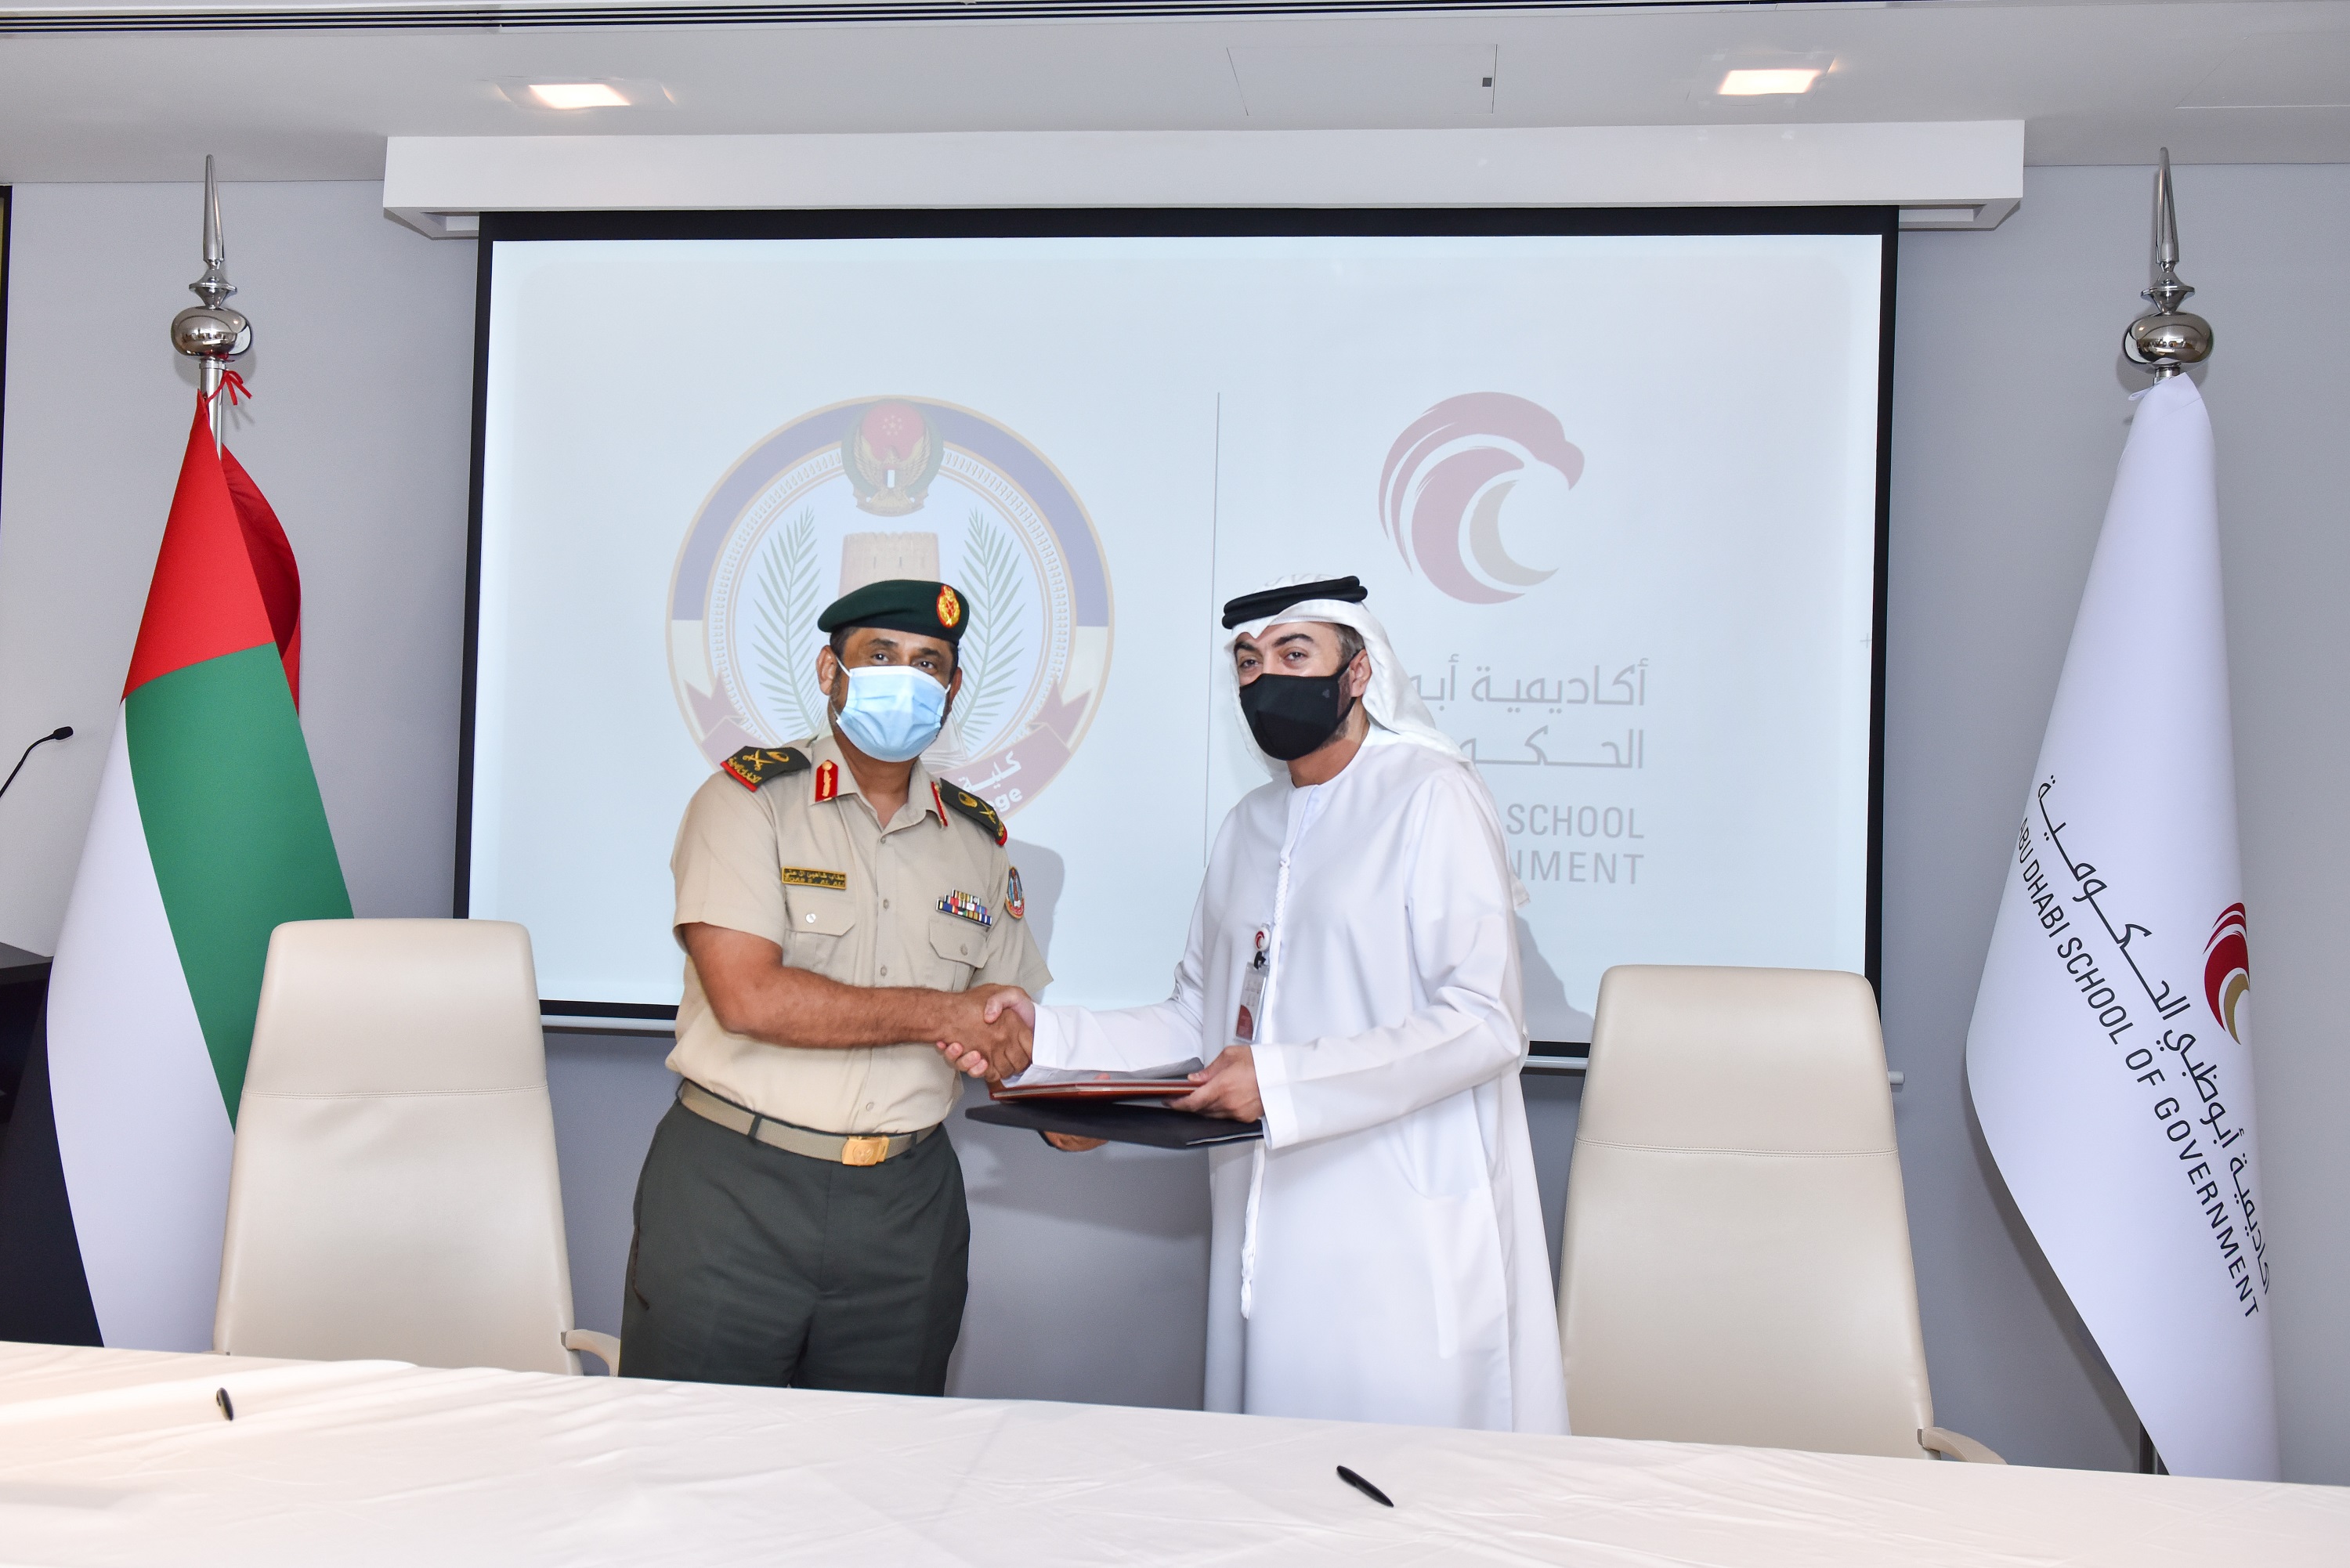 The National Defense College And The Abu Dhabi School Of Government Signs MOU To Develop Unique Joint Training Programs